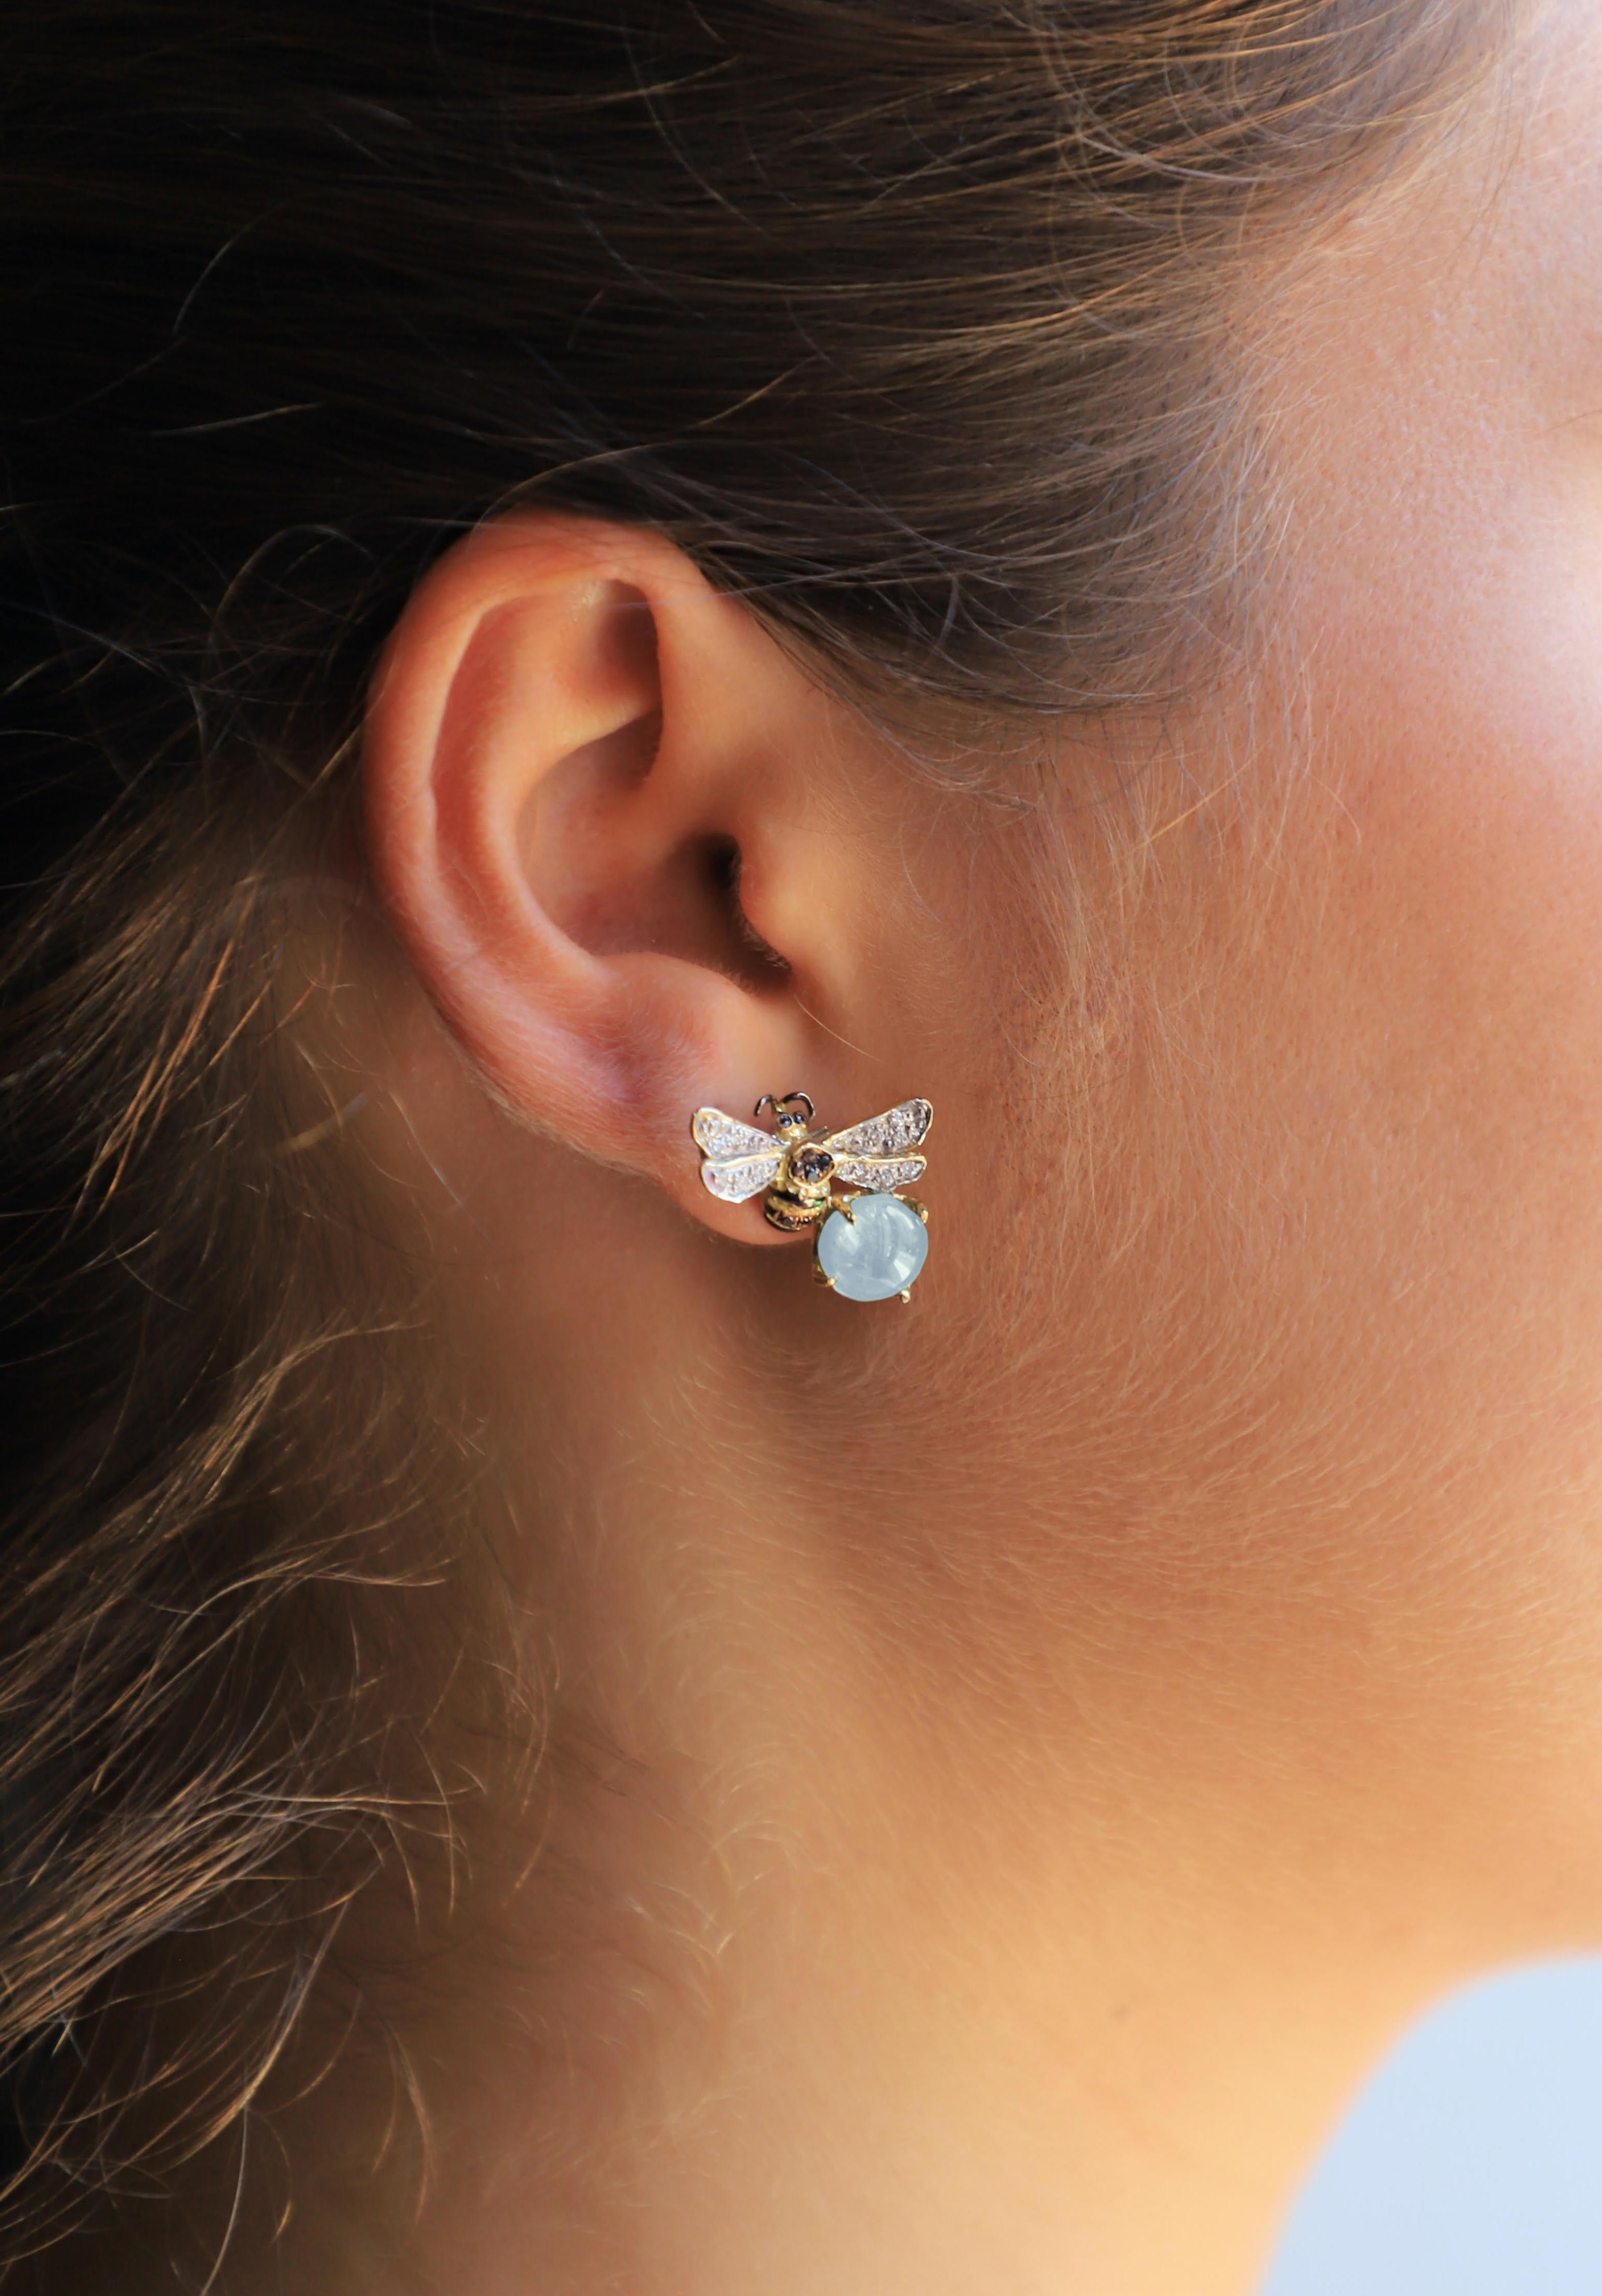 Rossella Ugolini Design Collection , 18 Karat Yellow Gold  4.12 Carats Aquamarine 0.16 Karat White Diamond 0.18 Karat Black Diamonds Bees Handcrafted Stud Earrings. This collection was born to celebrate a precious creature, essential for our